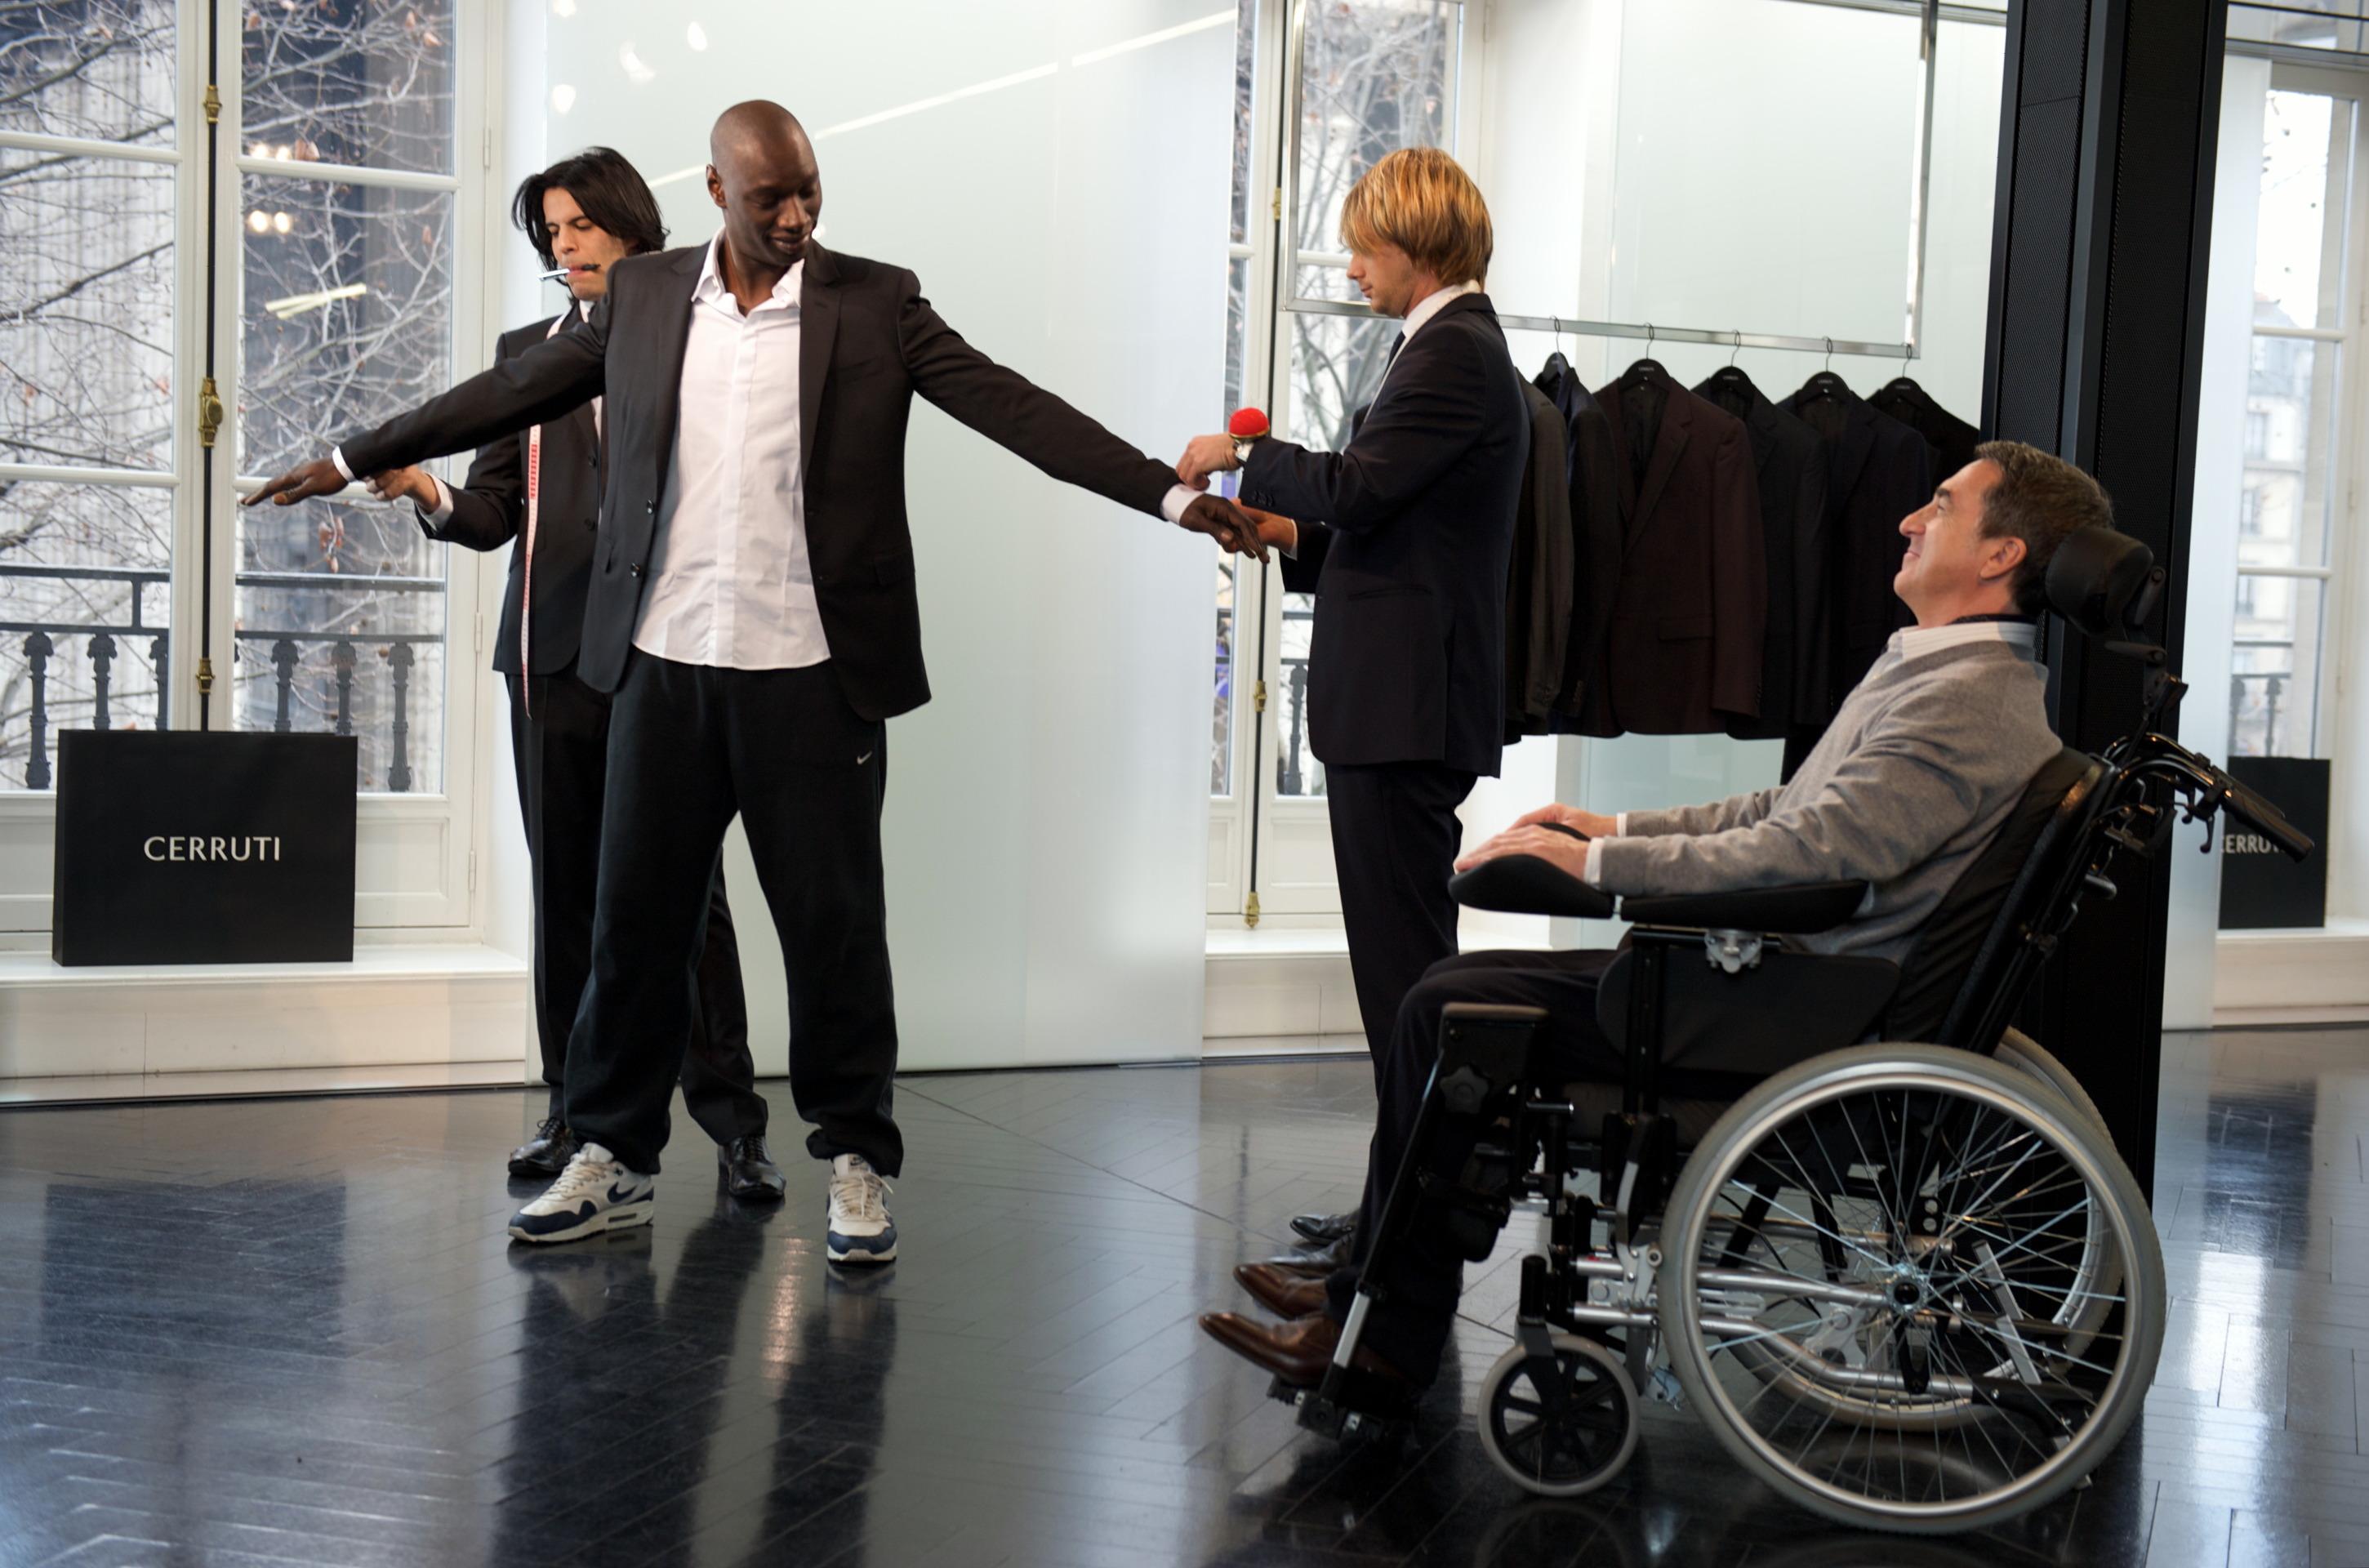 The Intouchables 1 1 Wallpaper High Quality